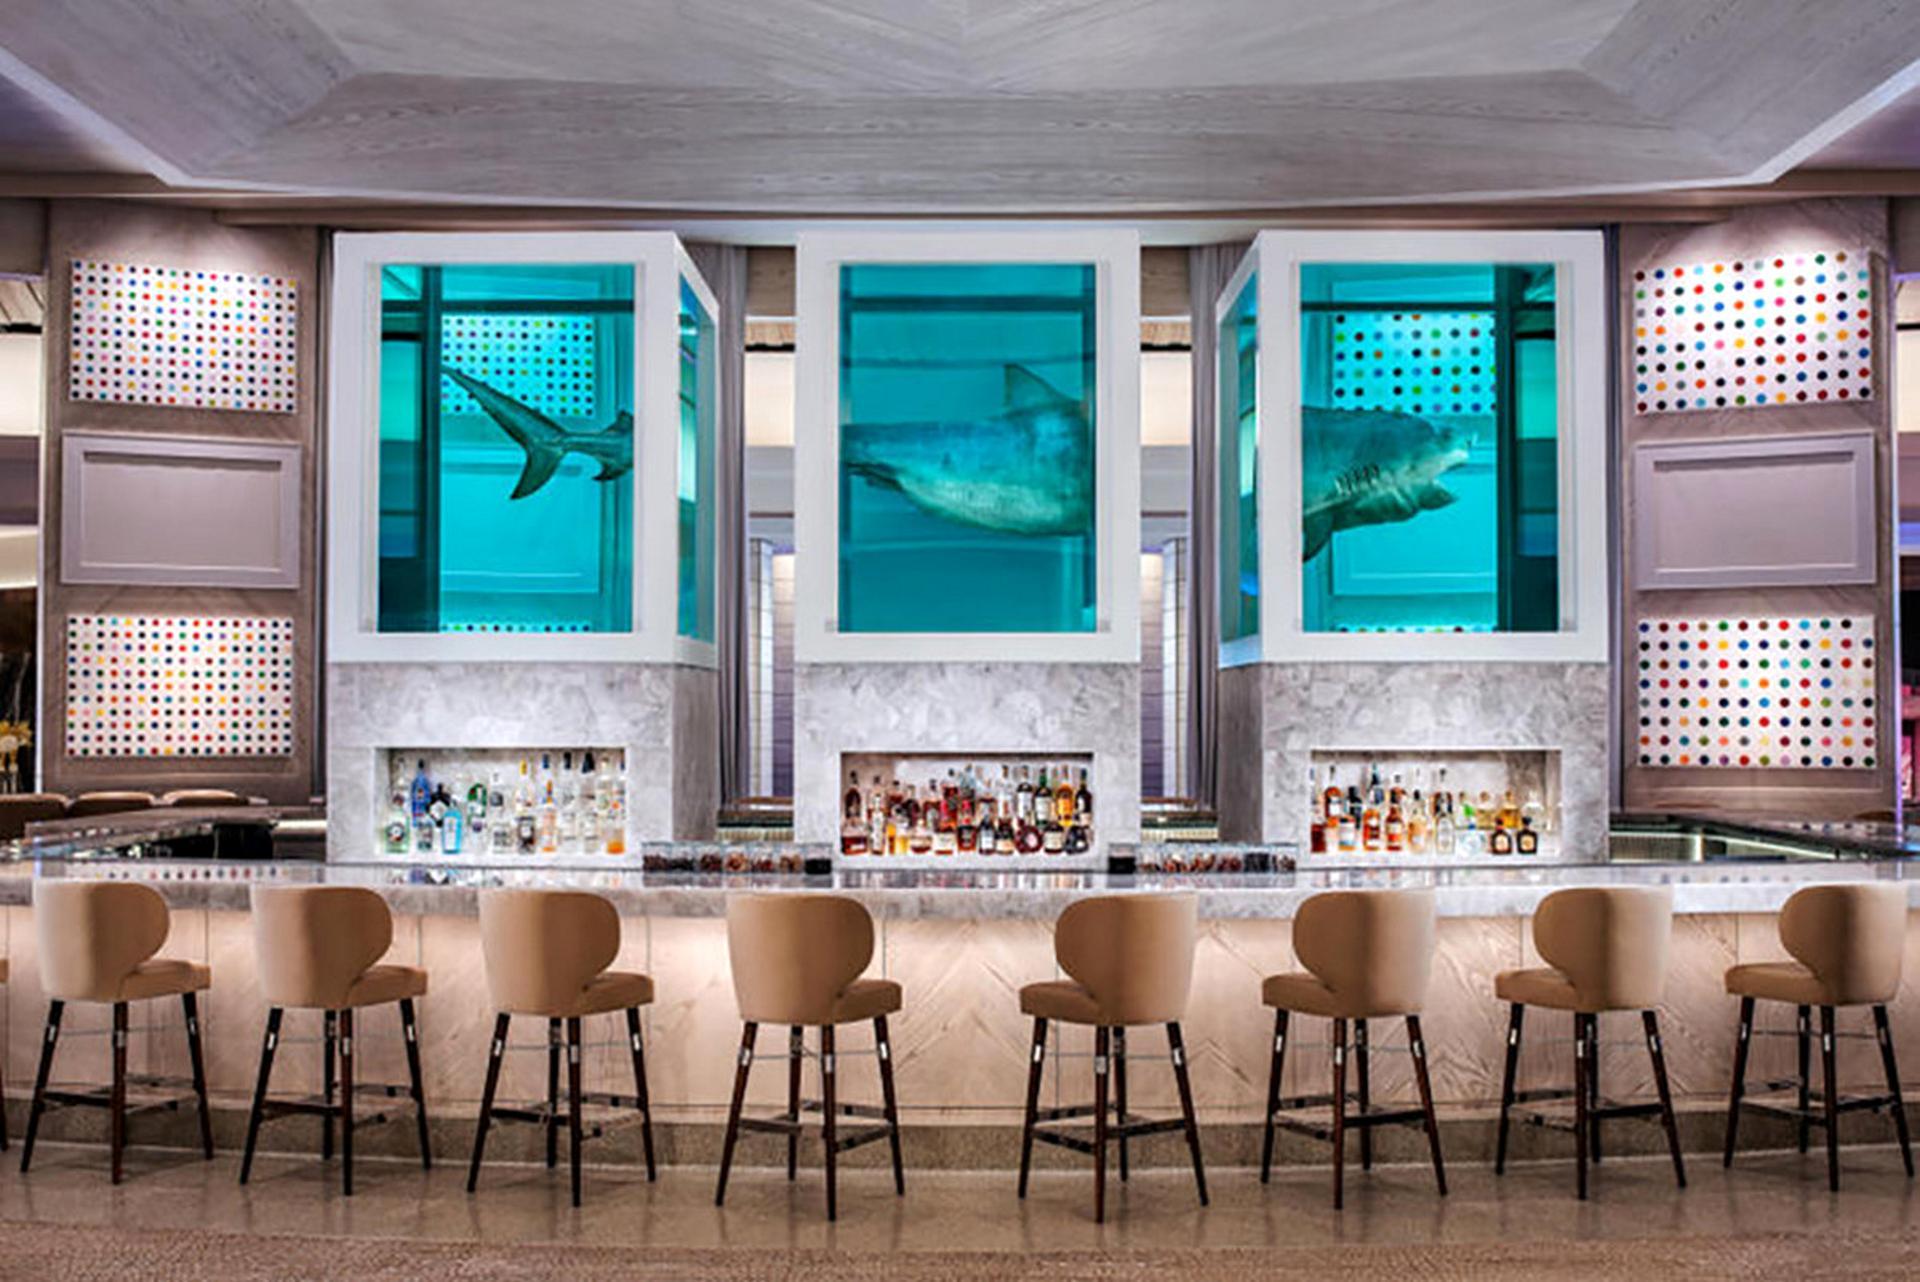 This New Damien Hirst Suite at Palms Casino Resort Costs $100,000